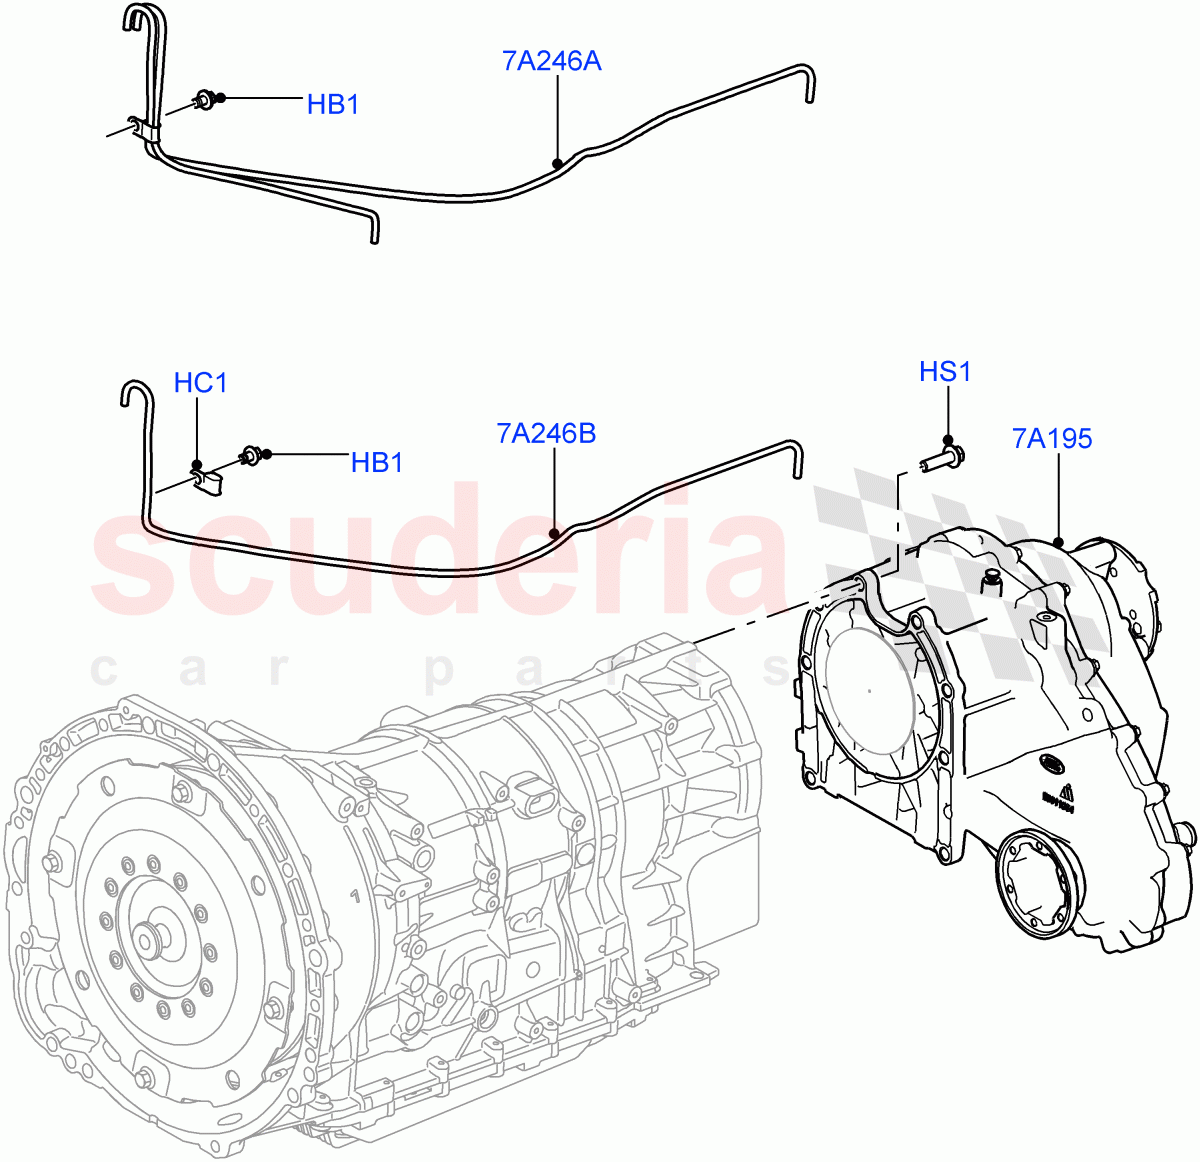 Transfer Drive Case(8 Speed Auto Trans ZF 8HP45,With 1 Speed Transfer Case,8 Speed Auto Trans ZF 8HP70 4WD)((V)FROMEA000001,(V)TOGA999999) of Land Rover Land Rover Range Rover Sport (2014+) [4.4 DOHC Diesel V8 DITC]